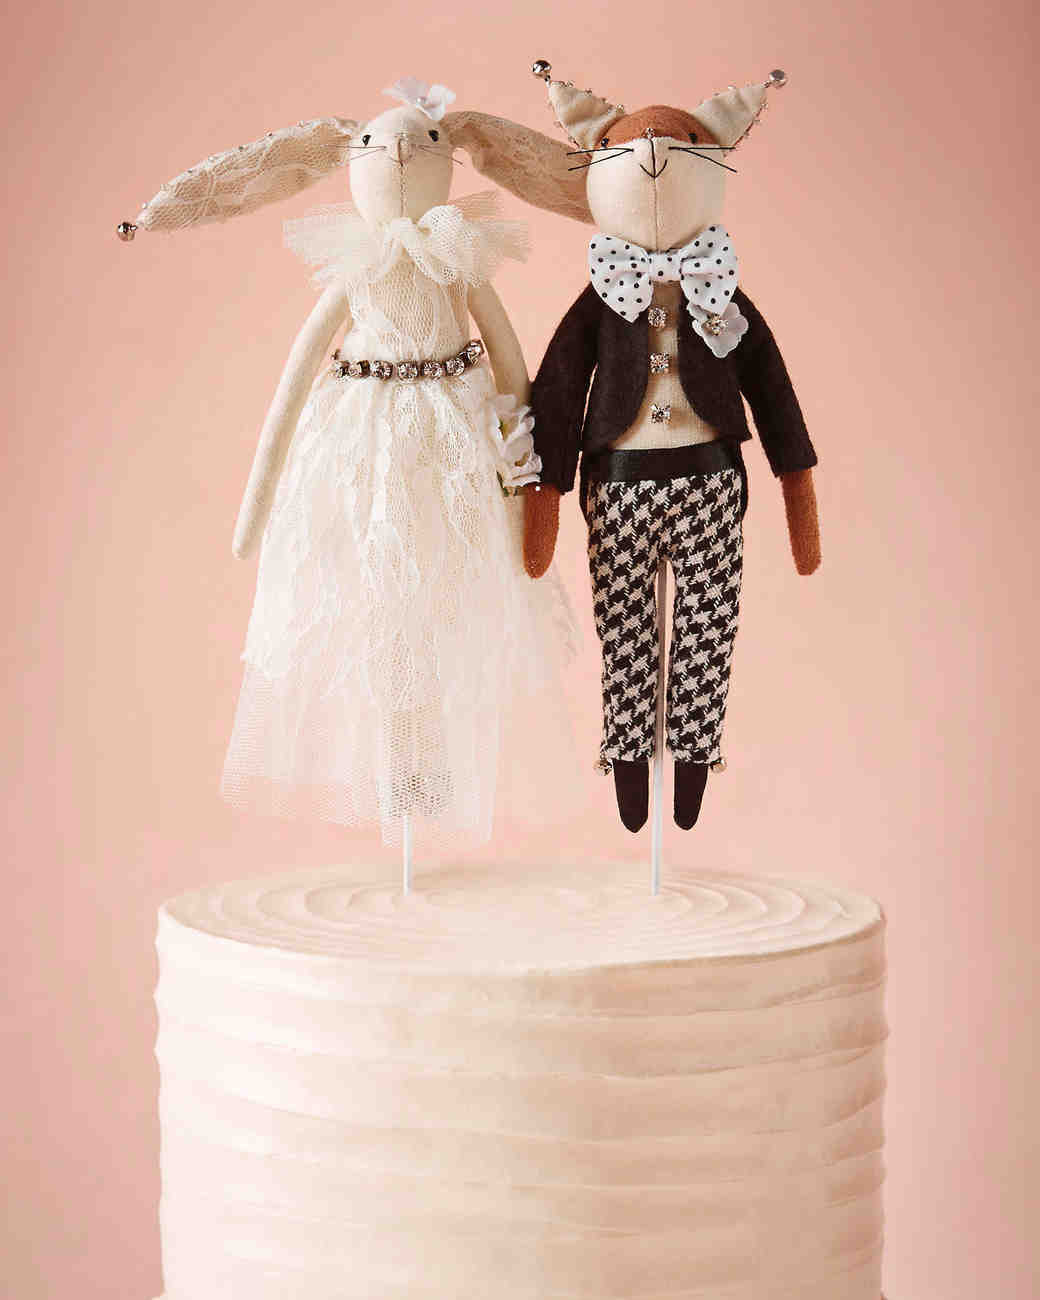 Cake Toppers Wedding
 25 Unique Wedding Cake Toppers